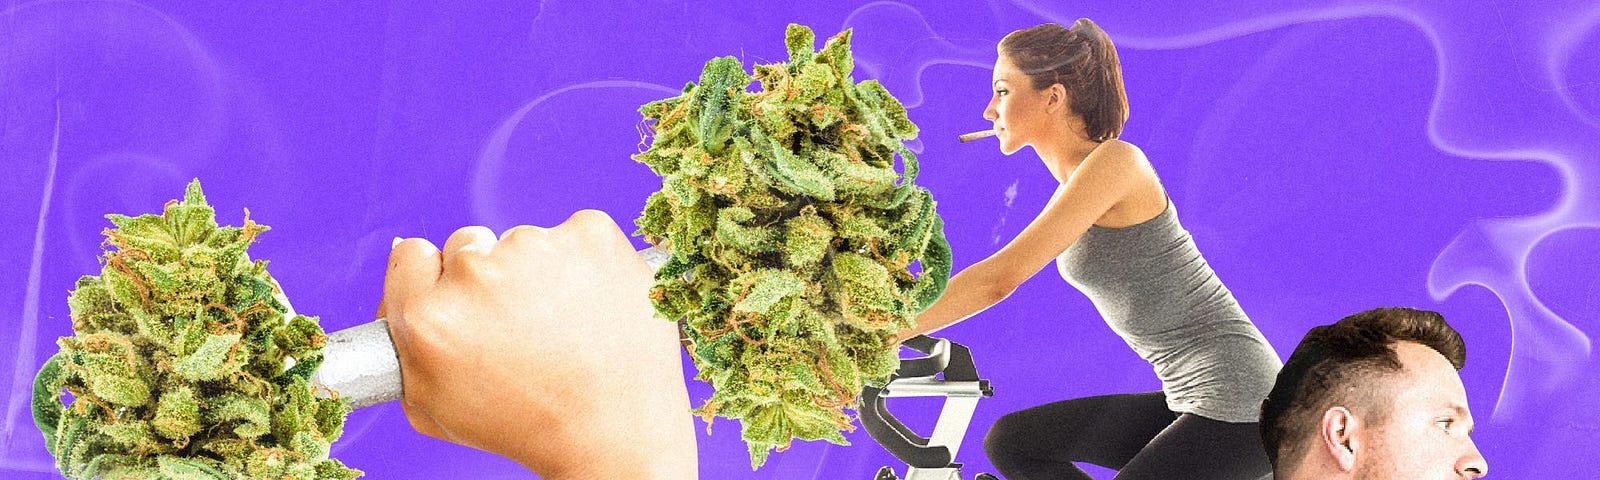 A graphic featuring people working out and an arm holding a dumbbell made out of weed leaves.